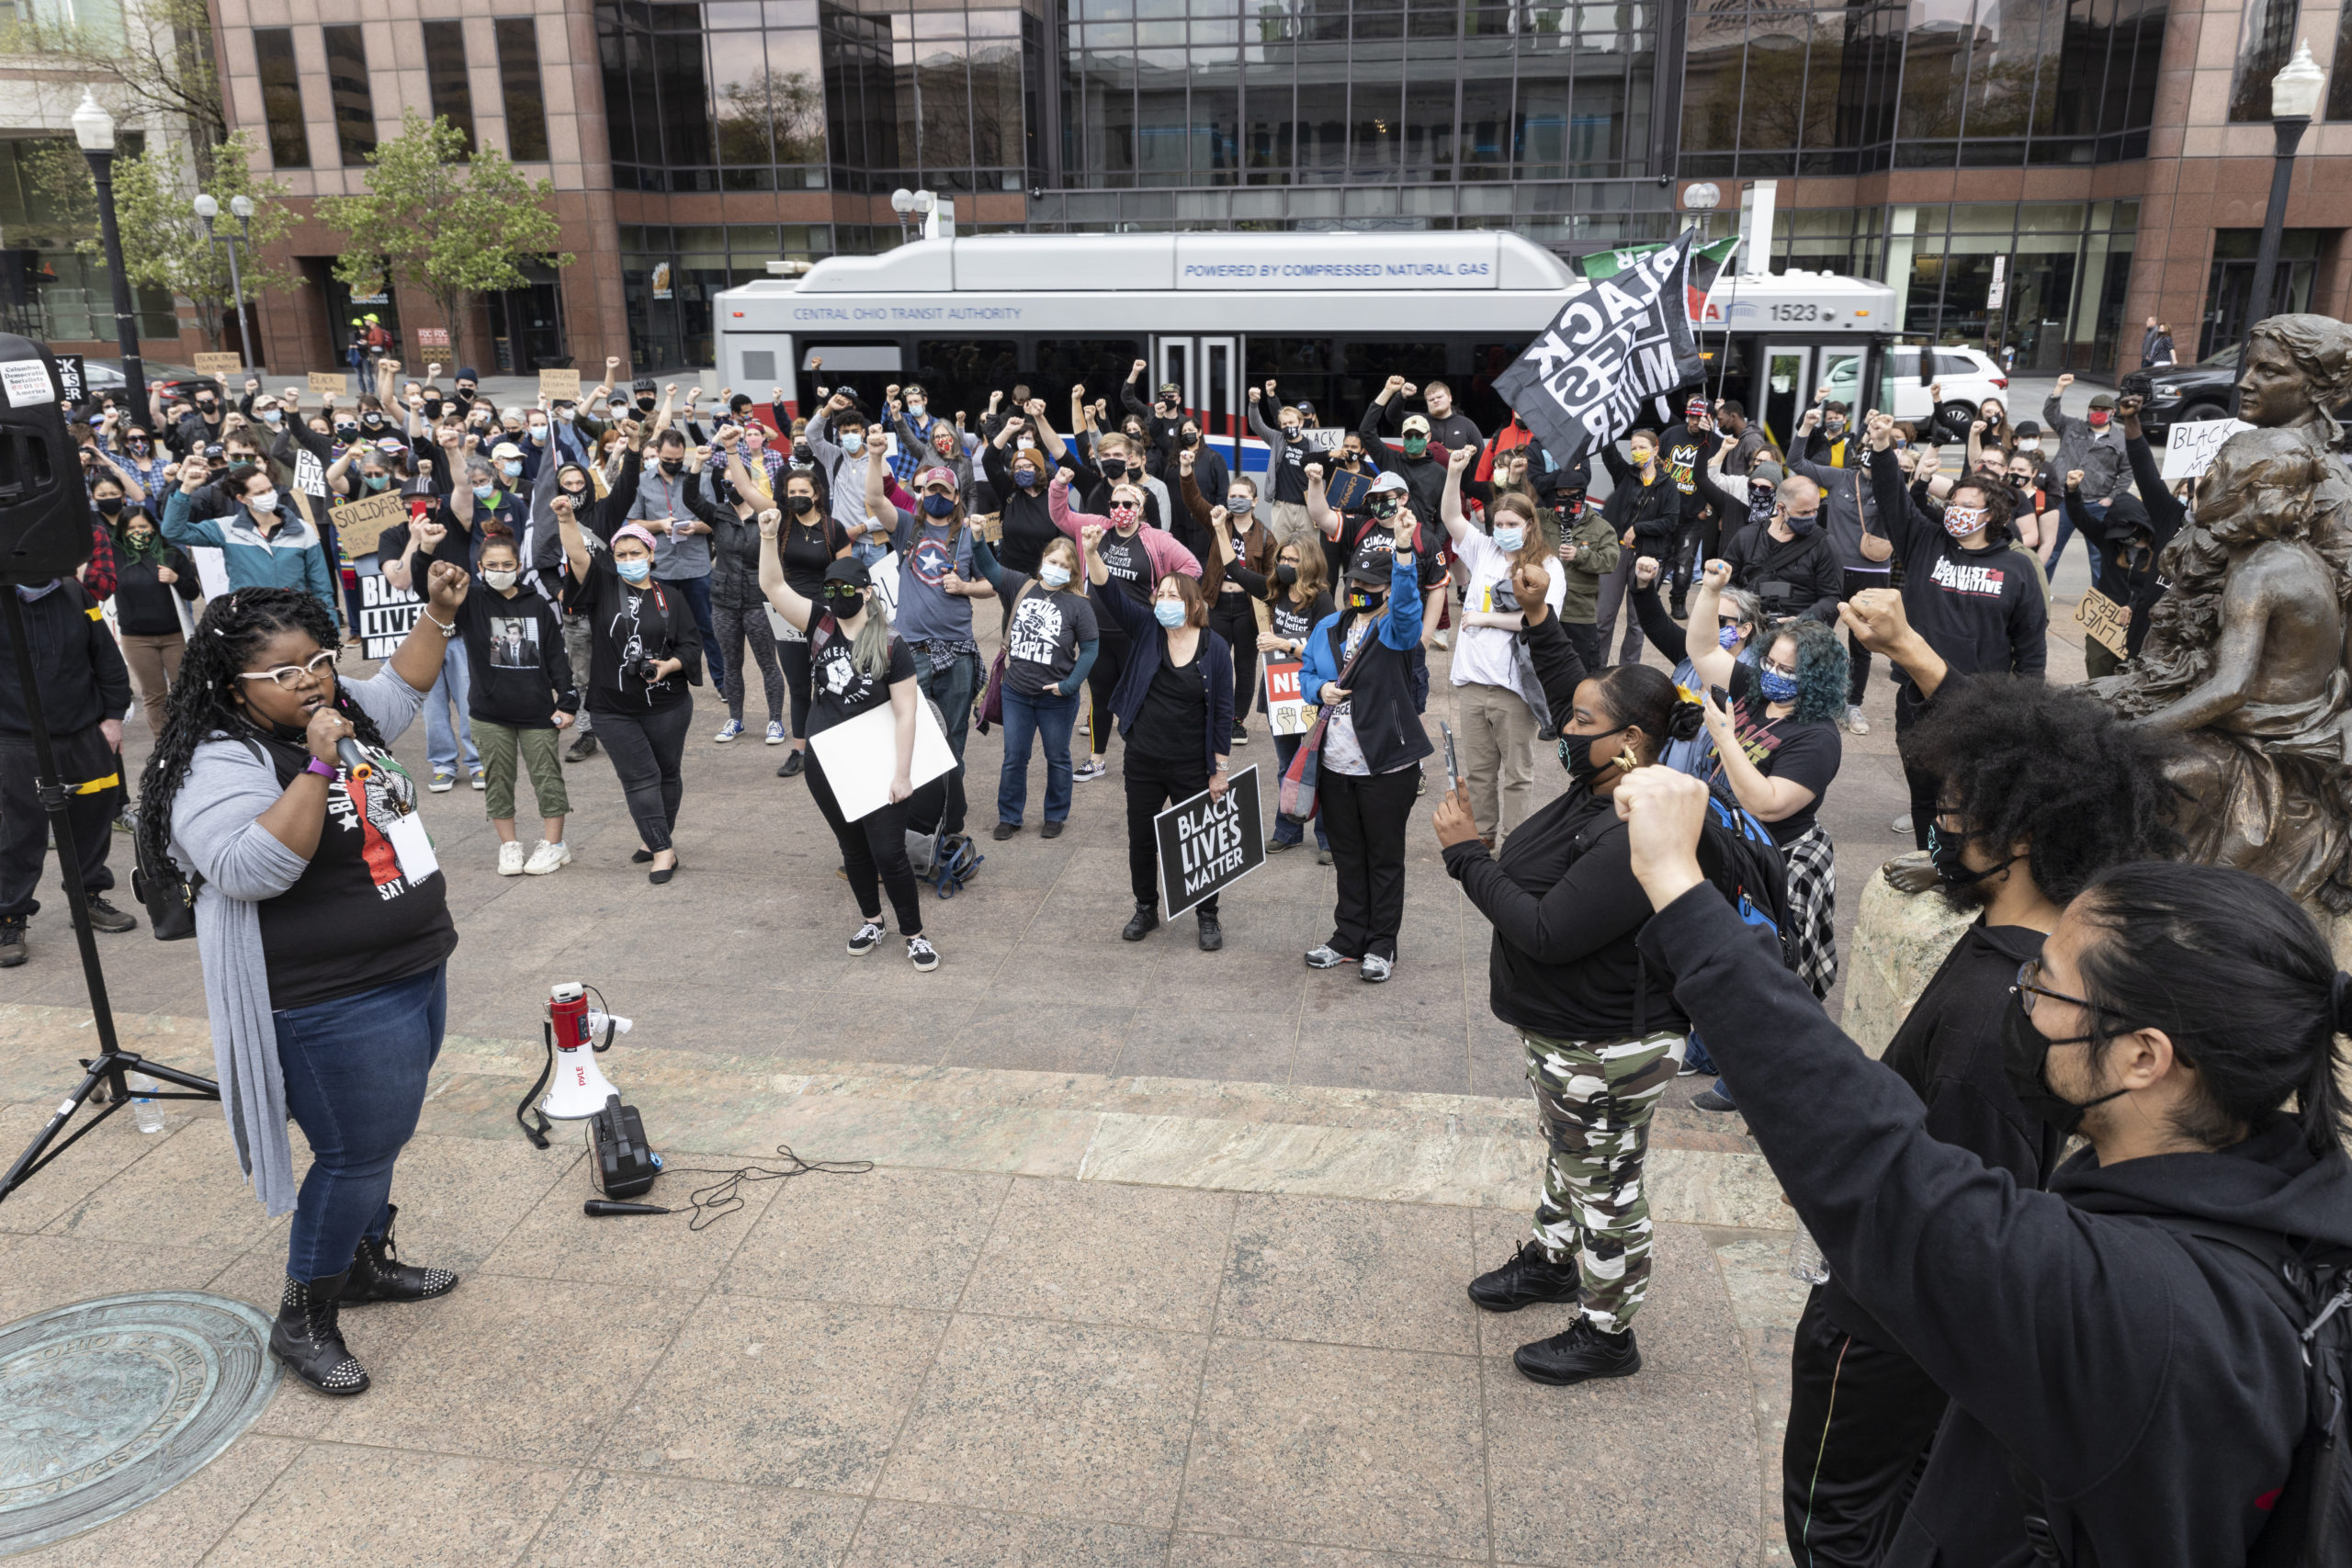 Kiara Yakita raises her fist while leading a protest in front of the Ohio Statehouse on April 17 in Columbus, Ohio. (Stephen Zenner/Getty Images)